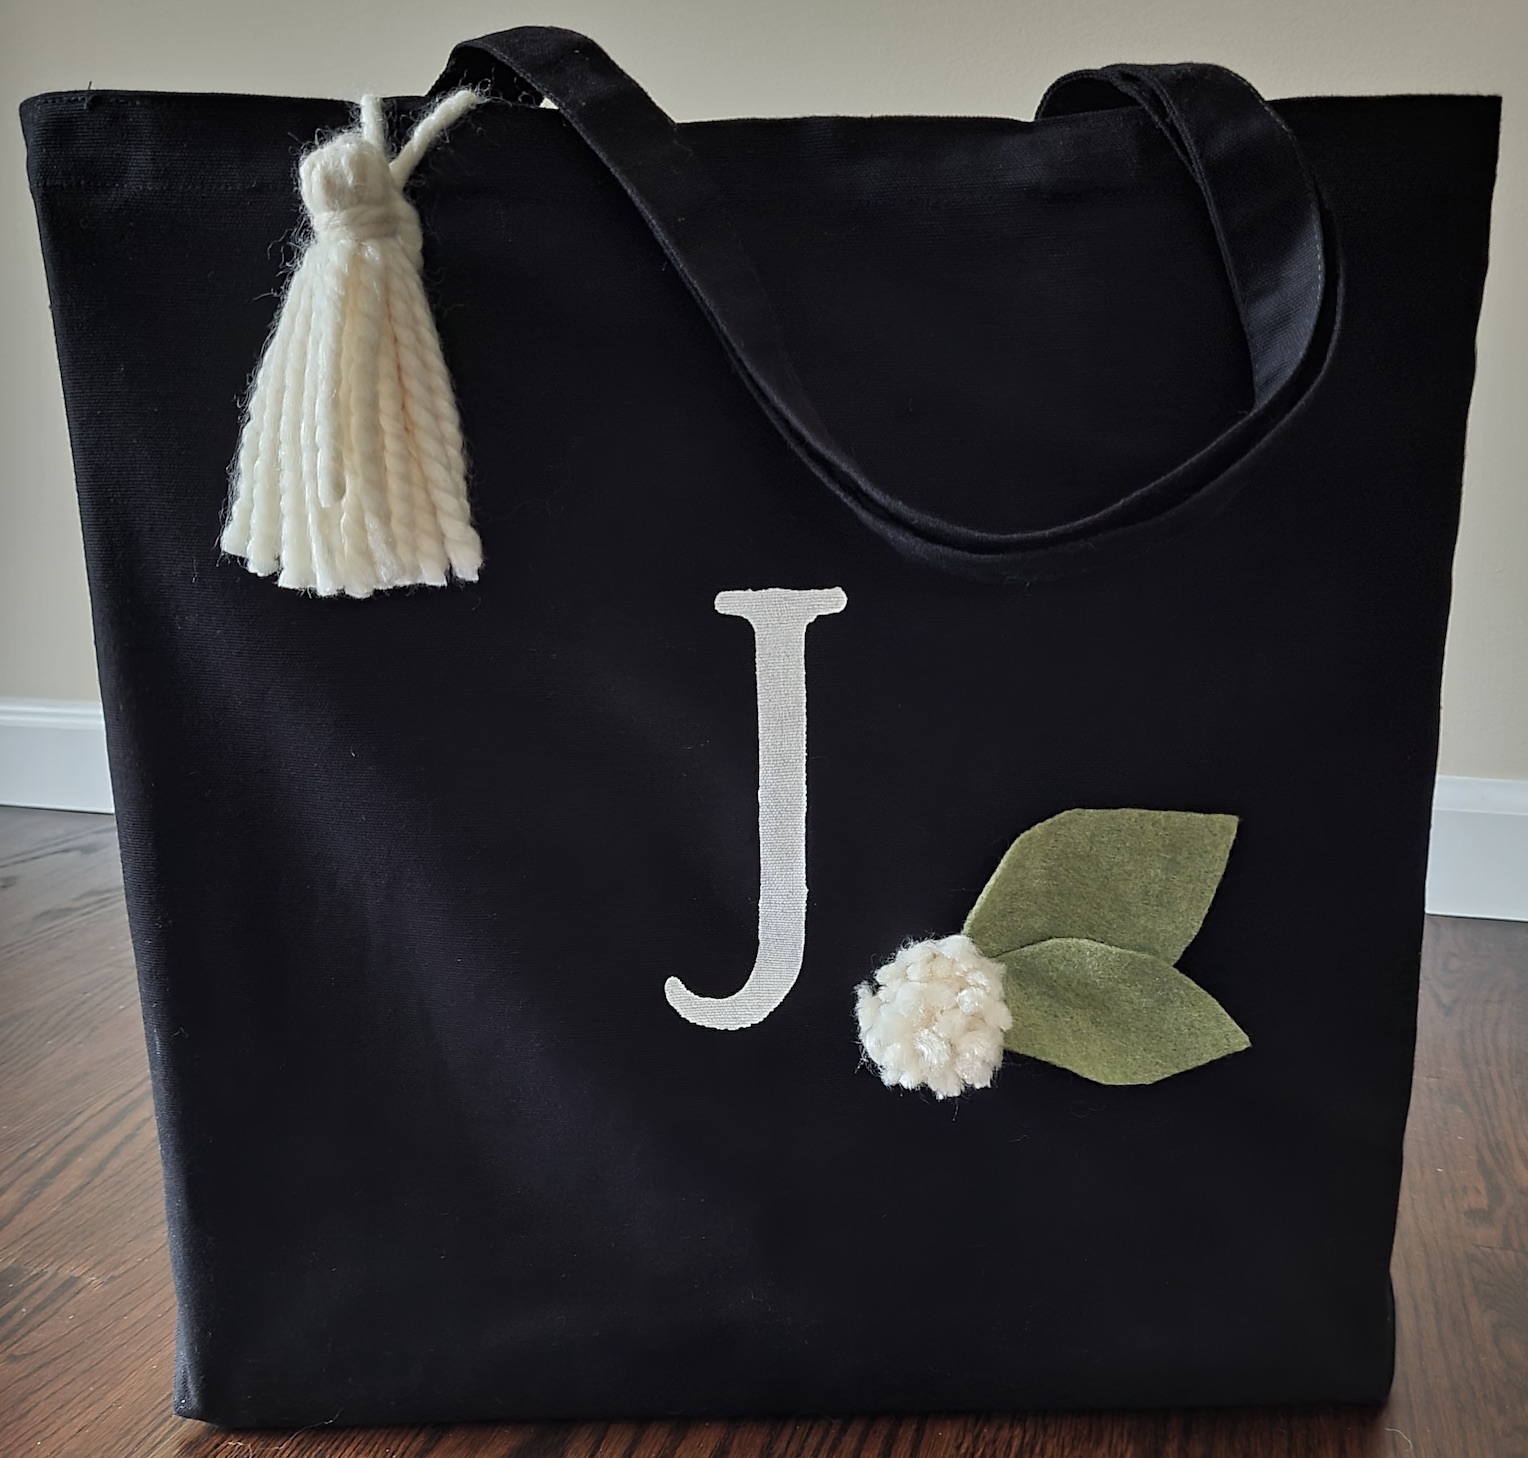 A photo of a black tote bag decorated with the letter J, a leaf applique and a tassel.